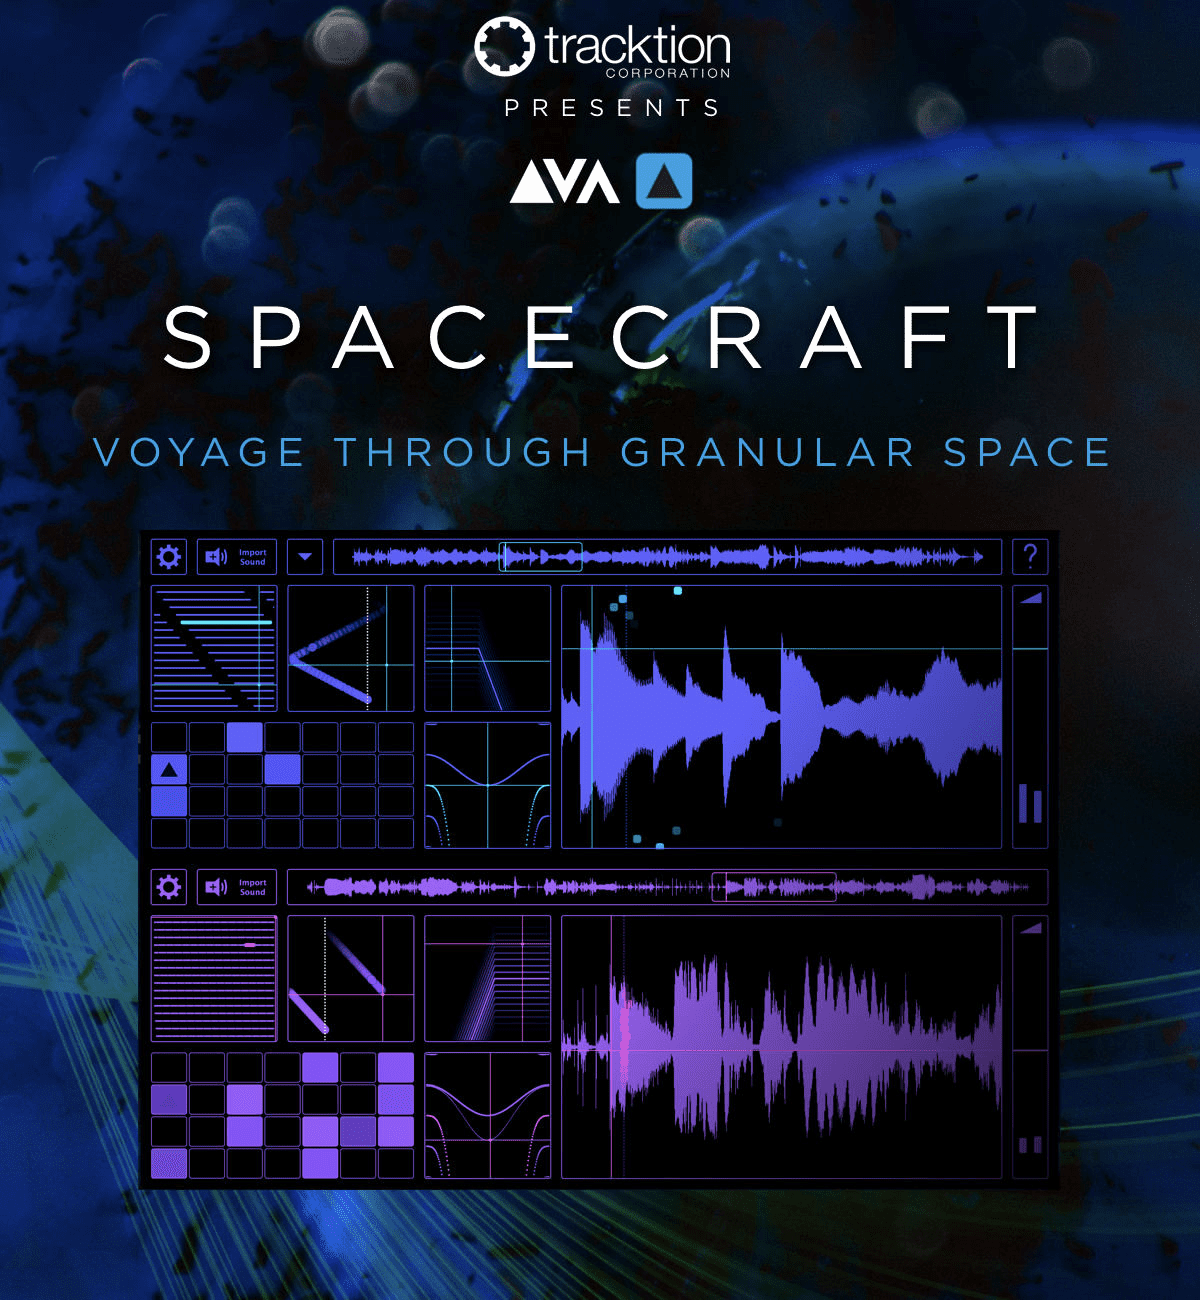 SpaceCraft – A New Granular Synth by Tracktion